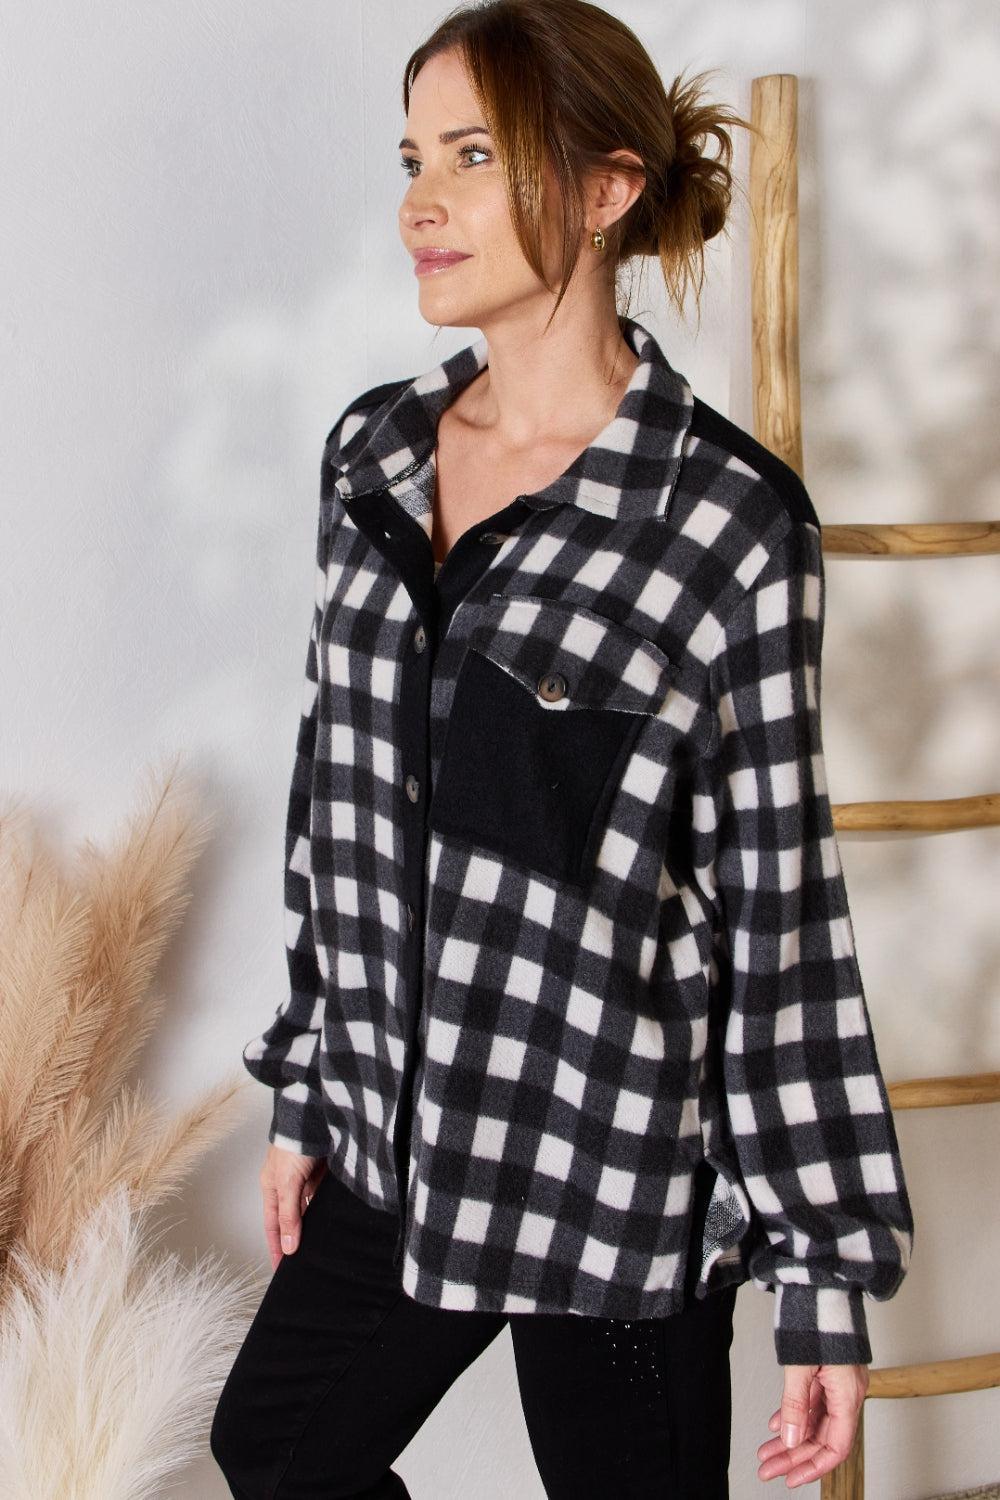 a woman wearing a black and white checkered shirt